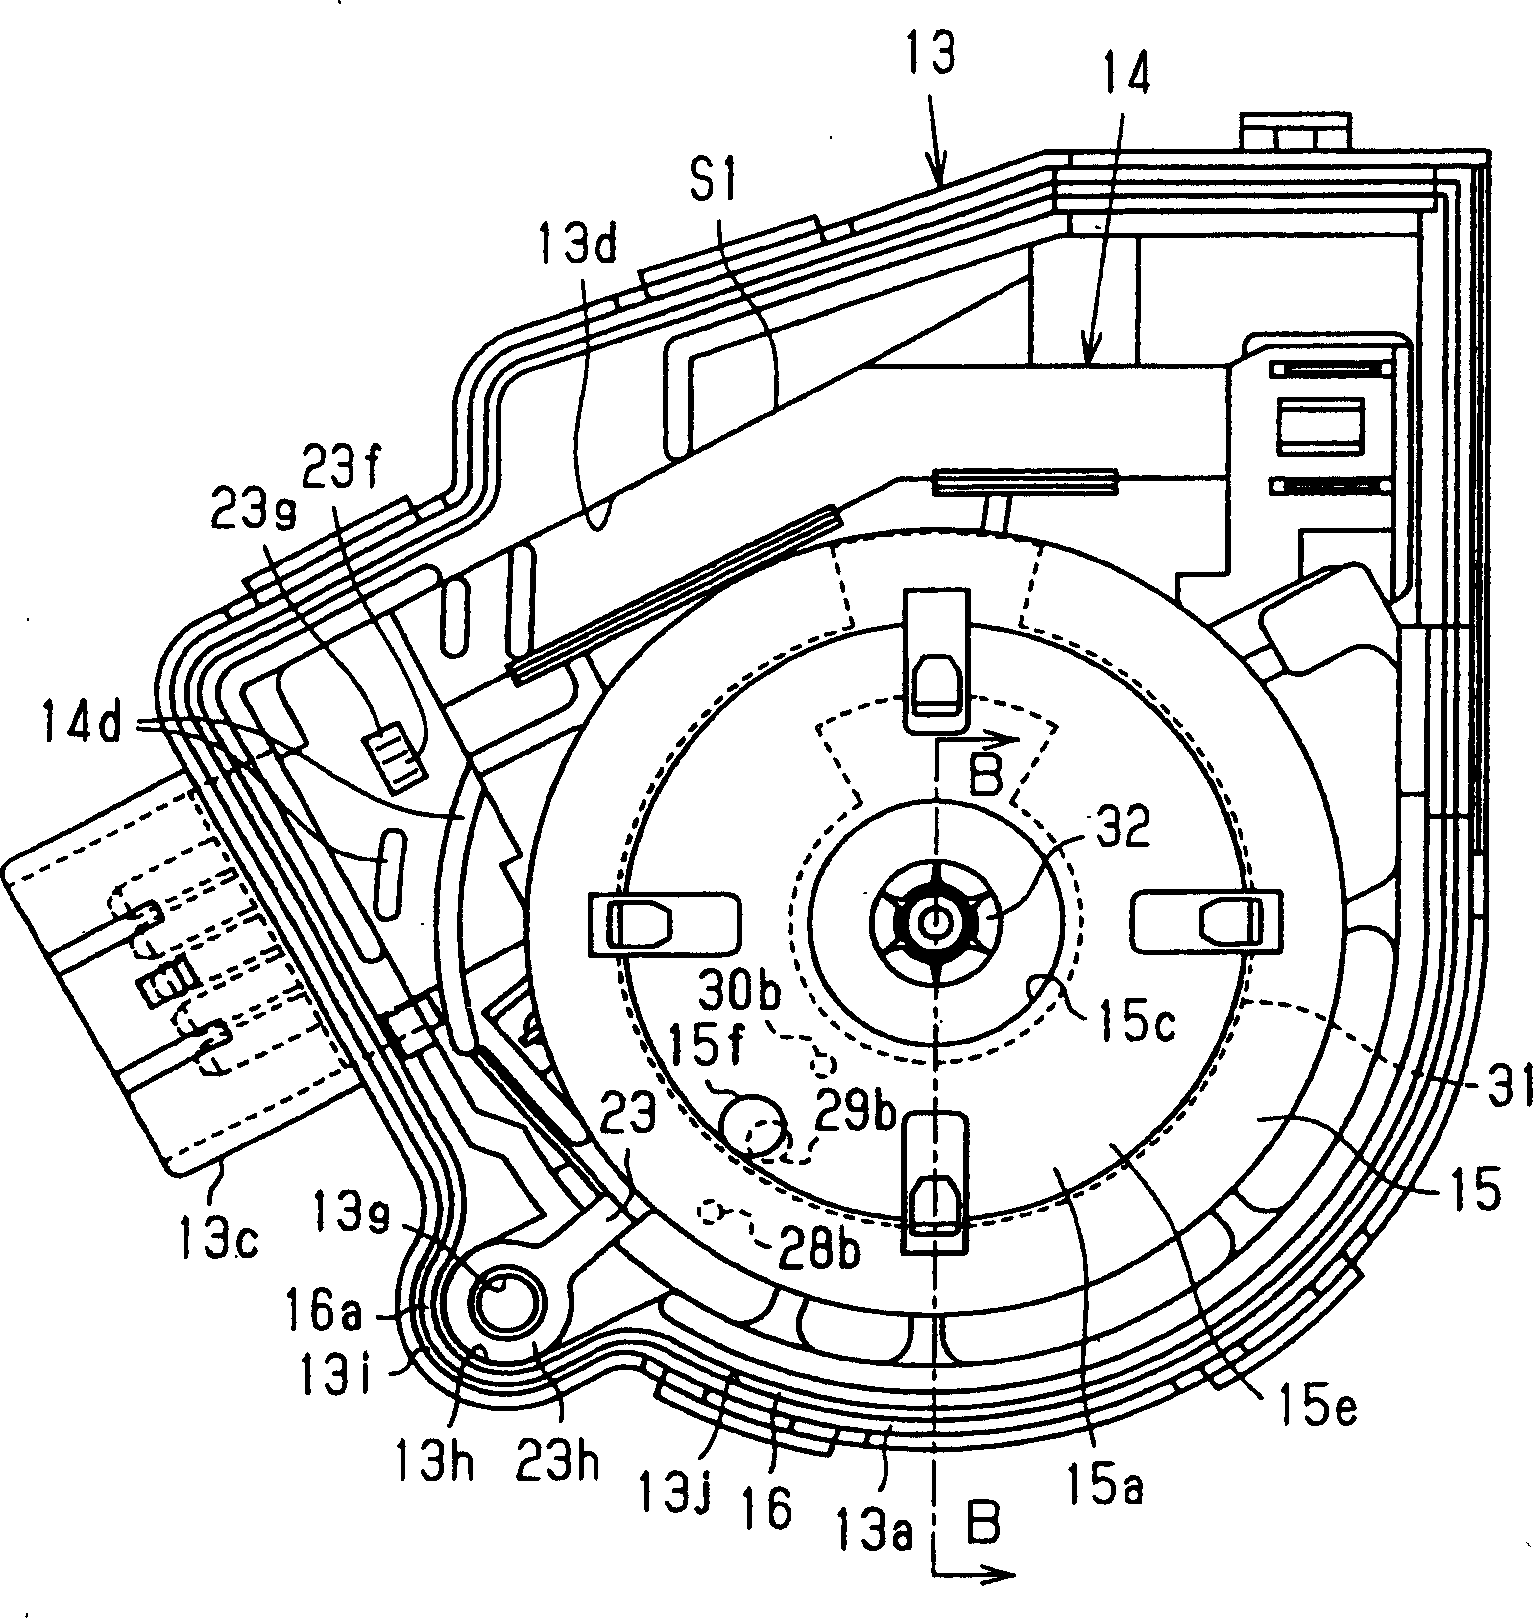 Casing structure and motor